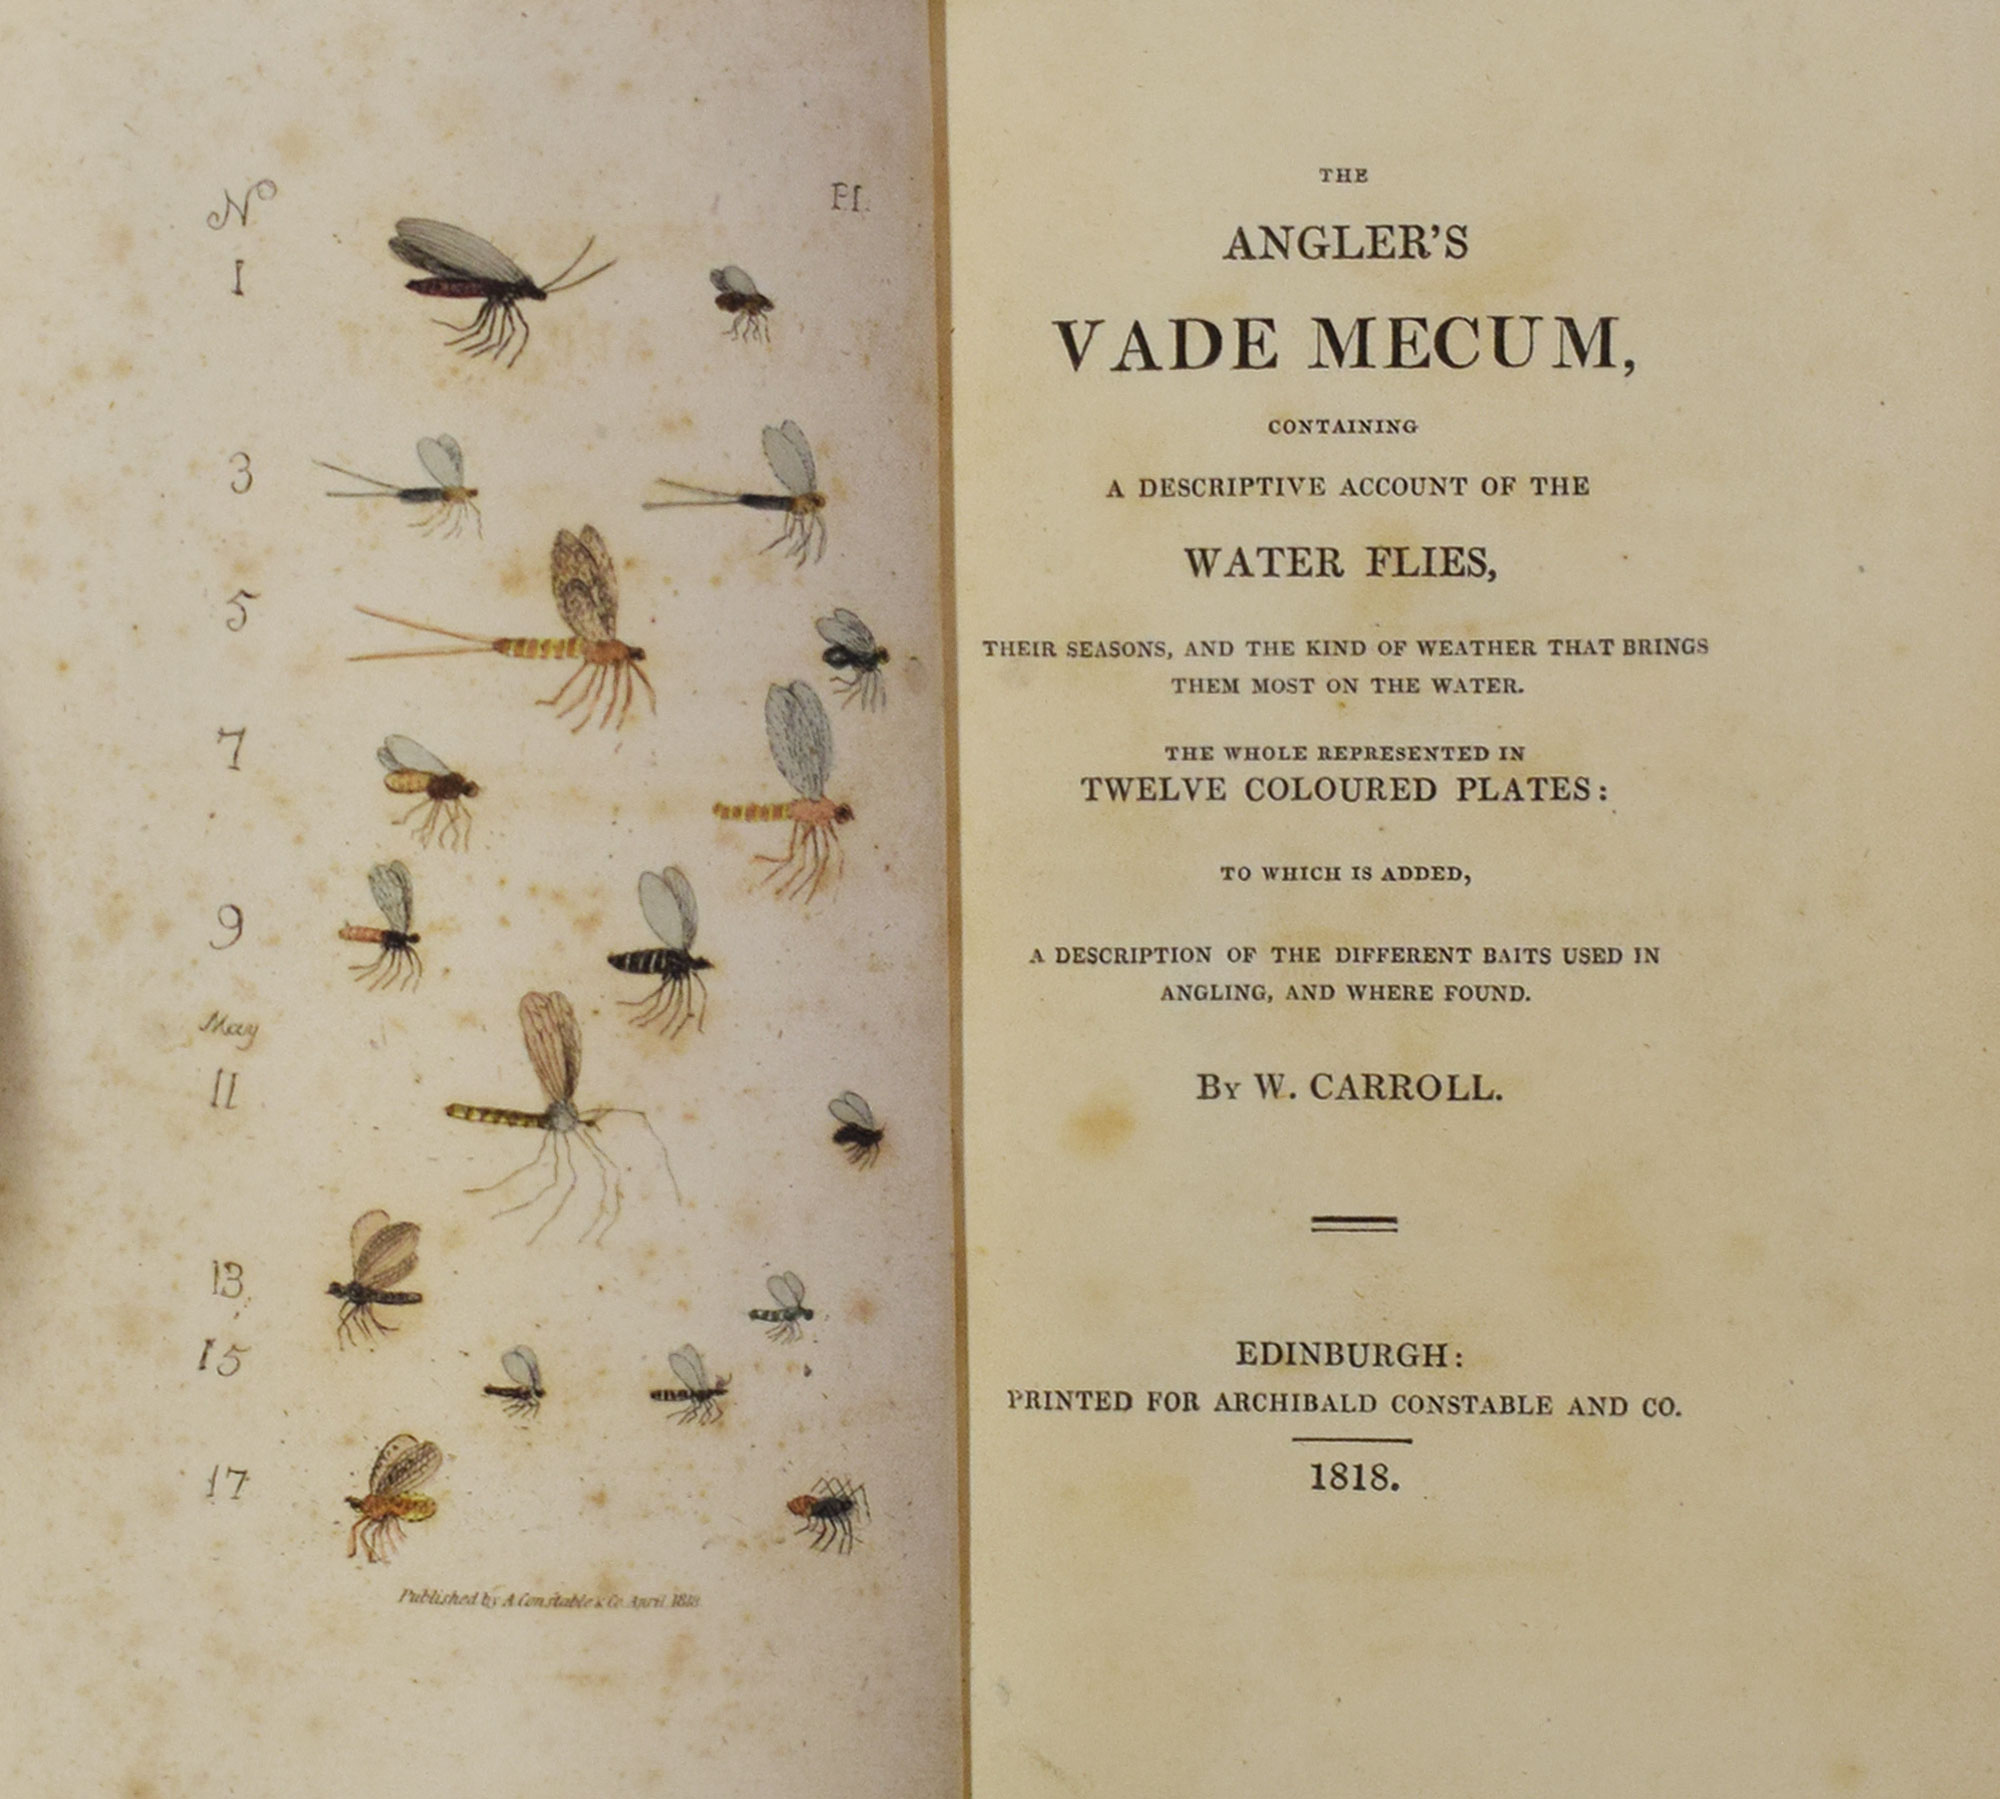 The Angler's Vade Mecum, Containing a Descriptive Account of the Water Flies, Their Seasons, and the Kind of Weather that Brings Them Most on the Water...